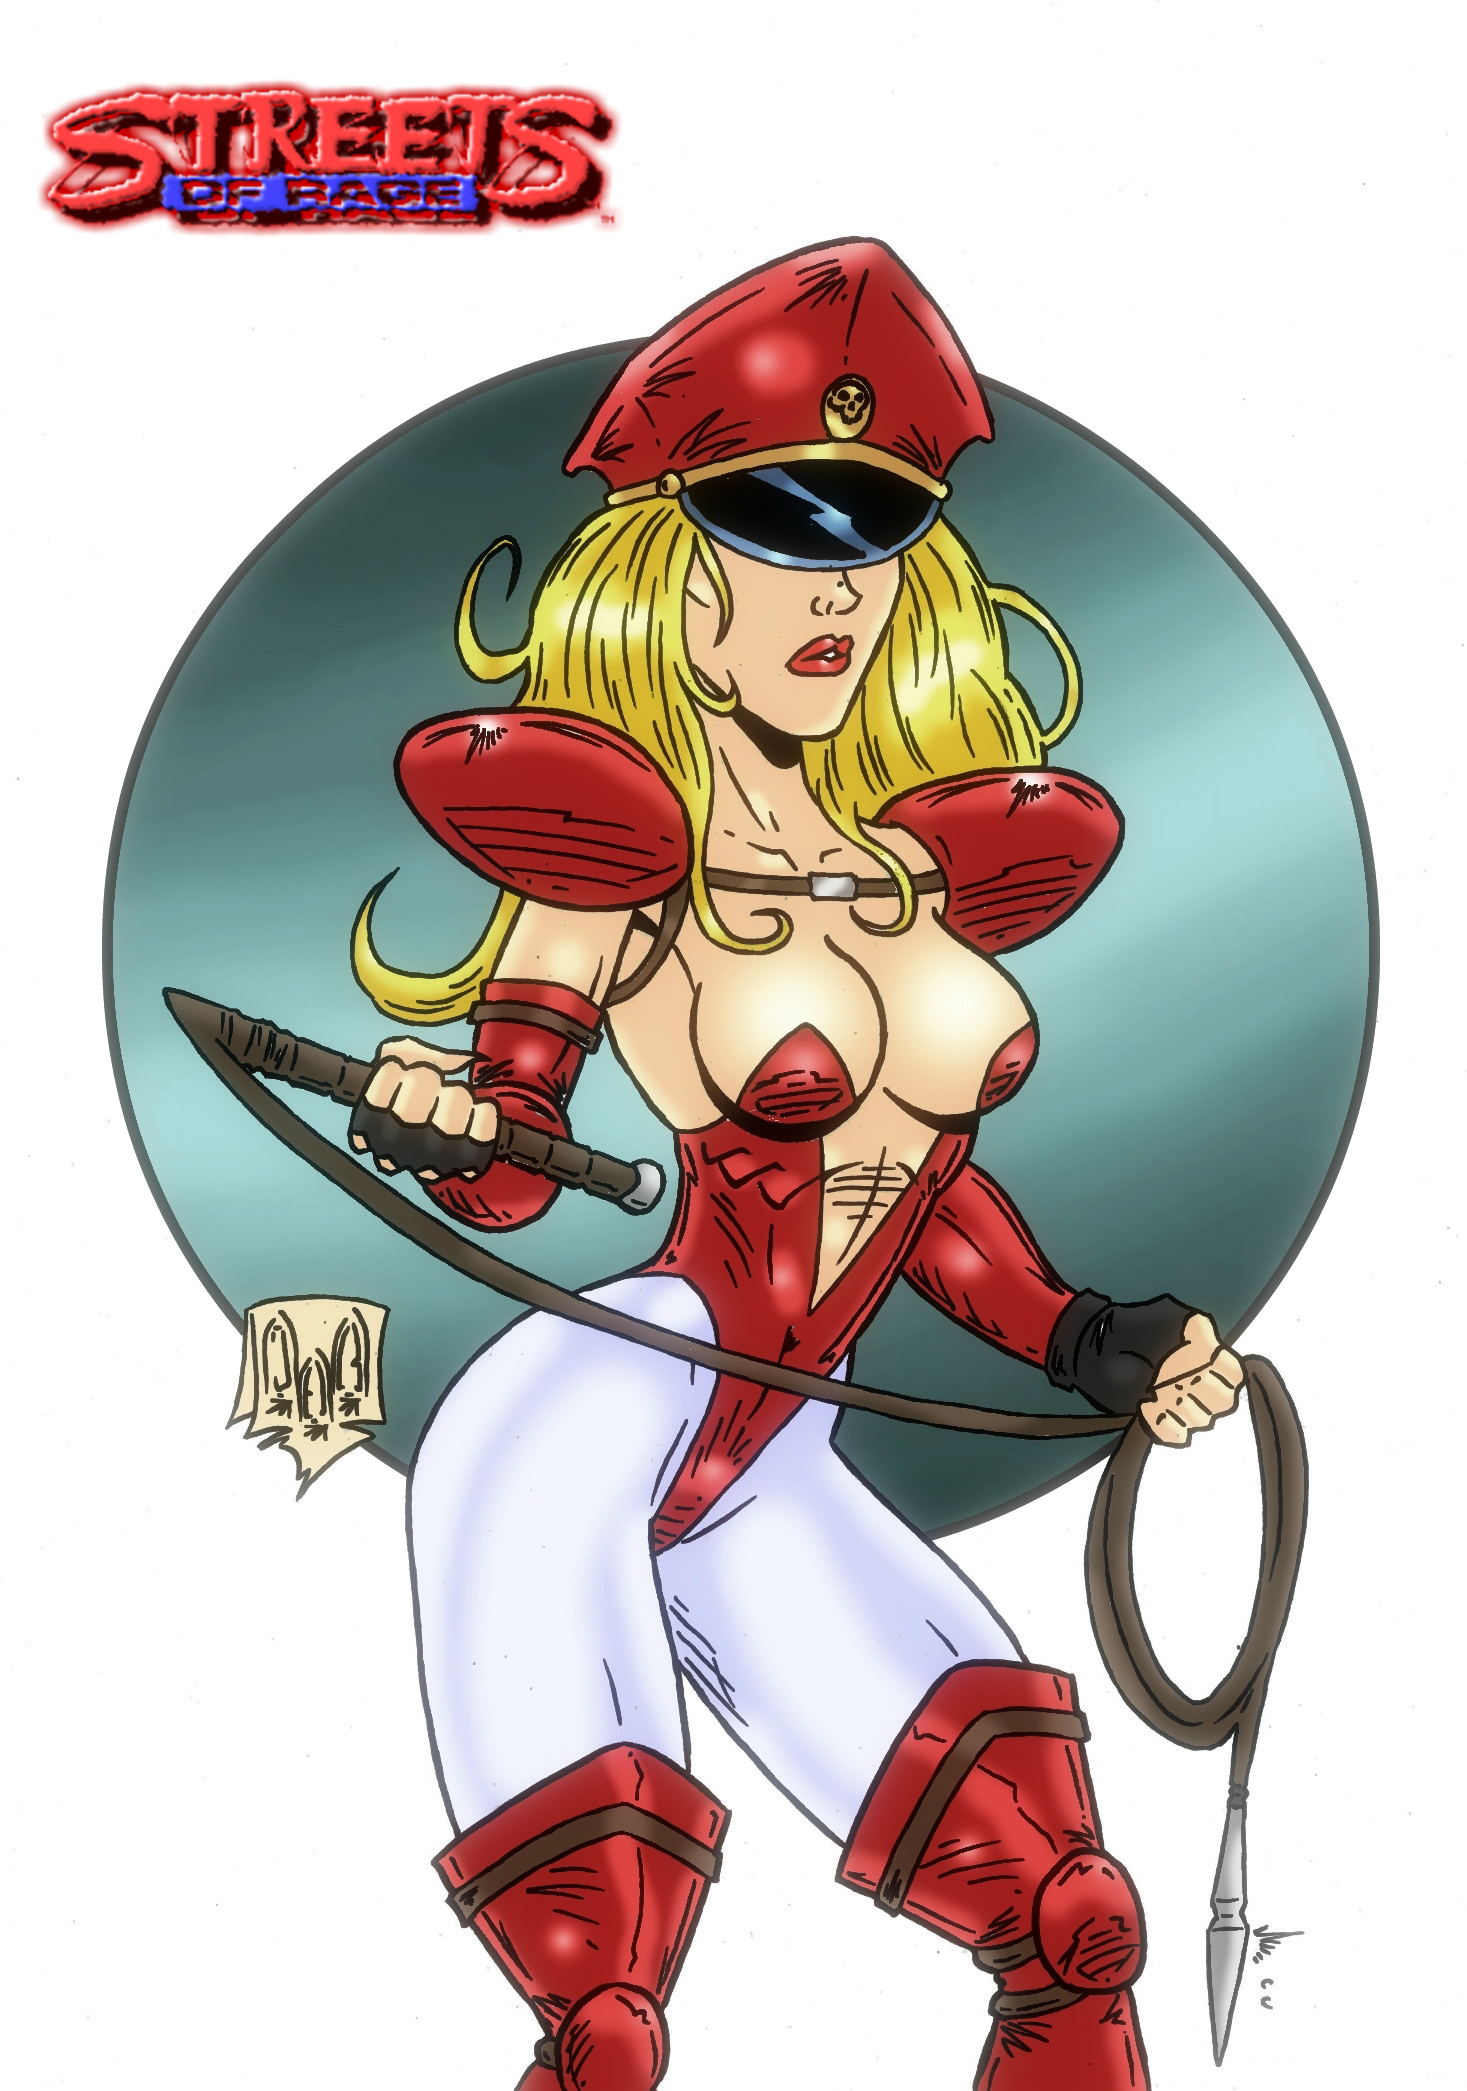 nora_from_streets_of_rage_by_violencejack666-d9jc1th.jpg